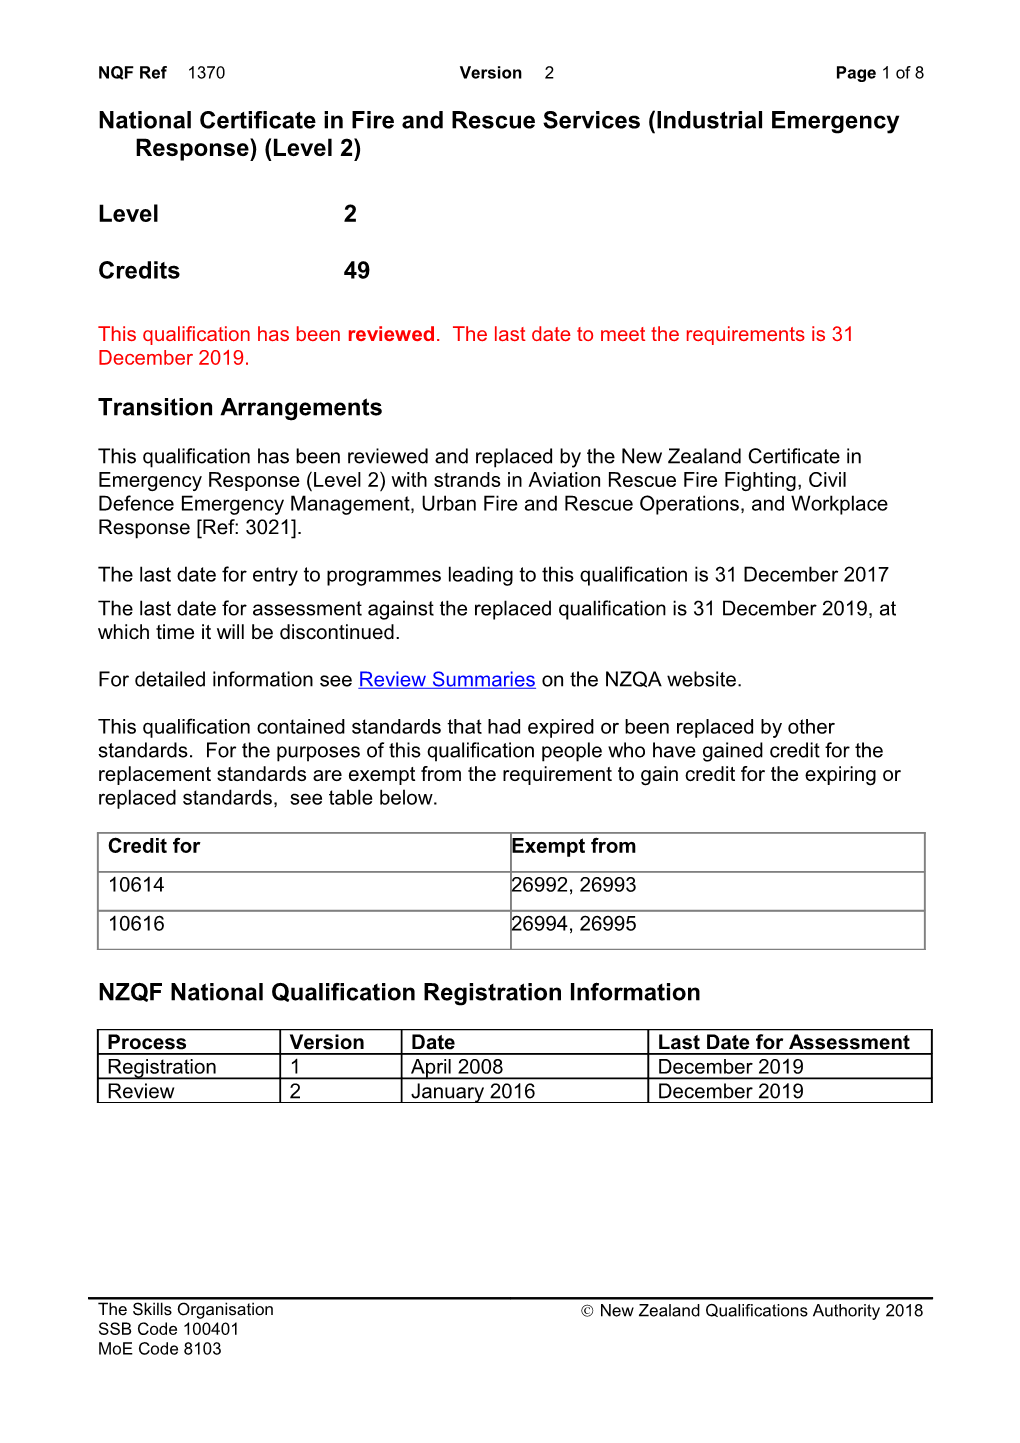 1370 National Certificate in Fire and Rescue Services (Industrial Emergency Response) (Level 2)